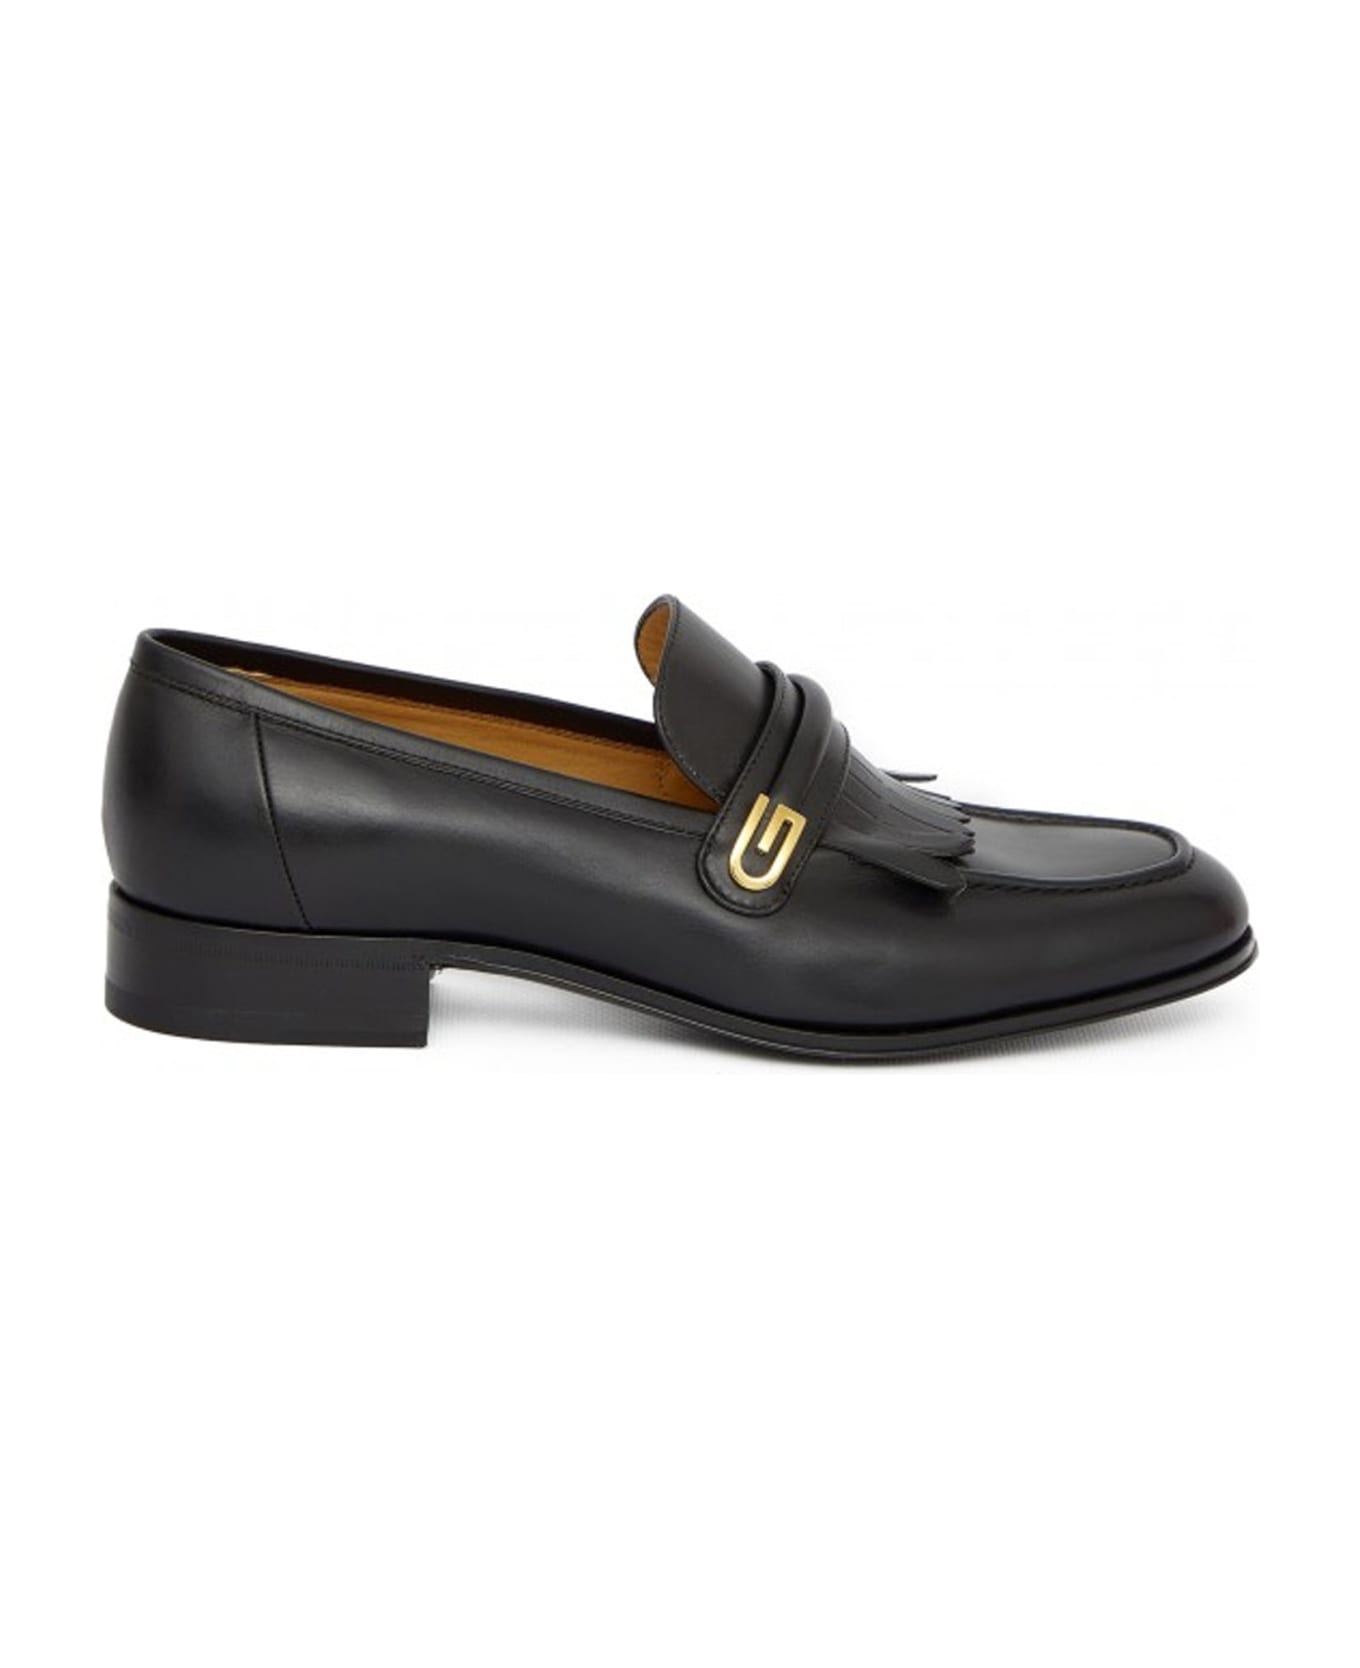 Gucci Leather Loafers - Black